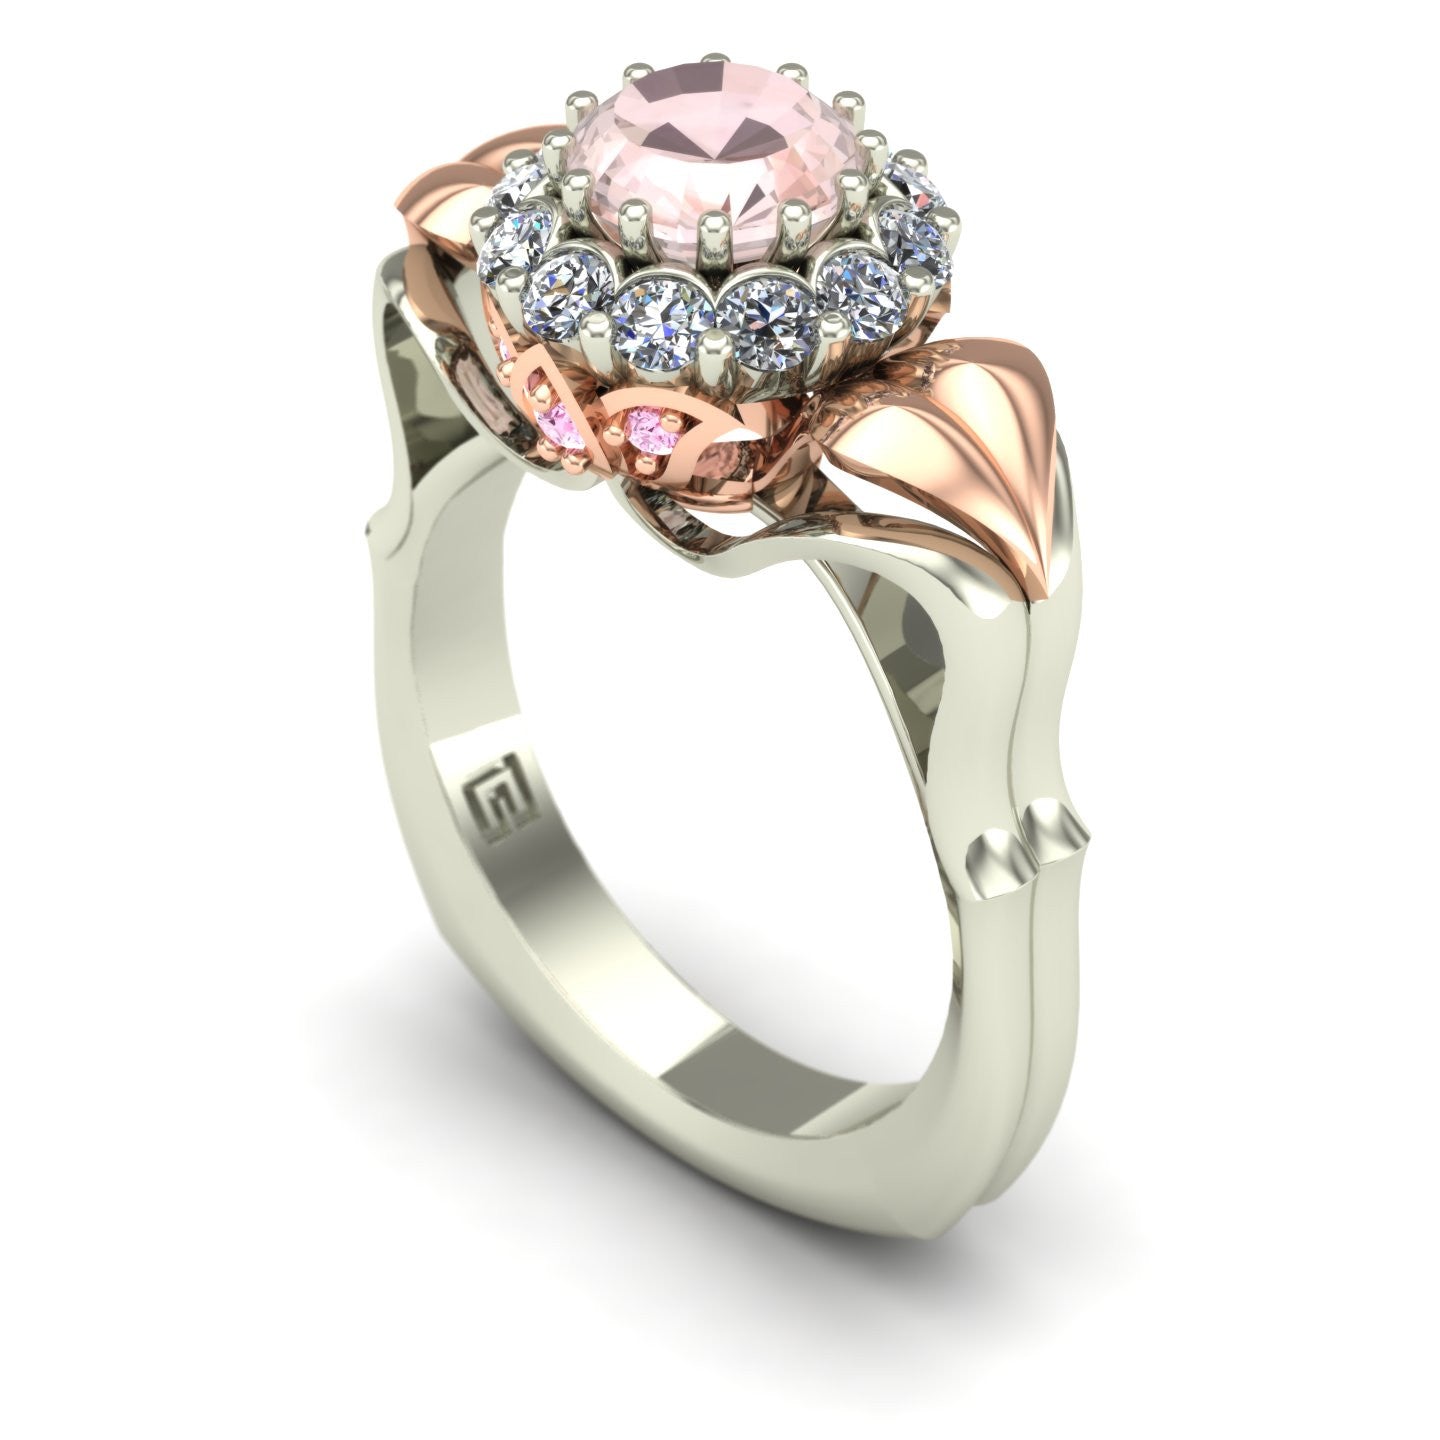 Morganite two tone flower ring with pink diamonds in 14k rose and white gold - Charles Babb Designs